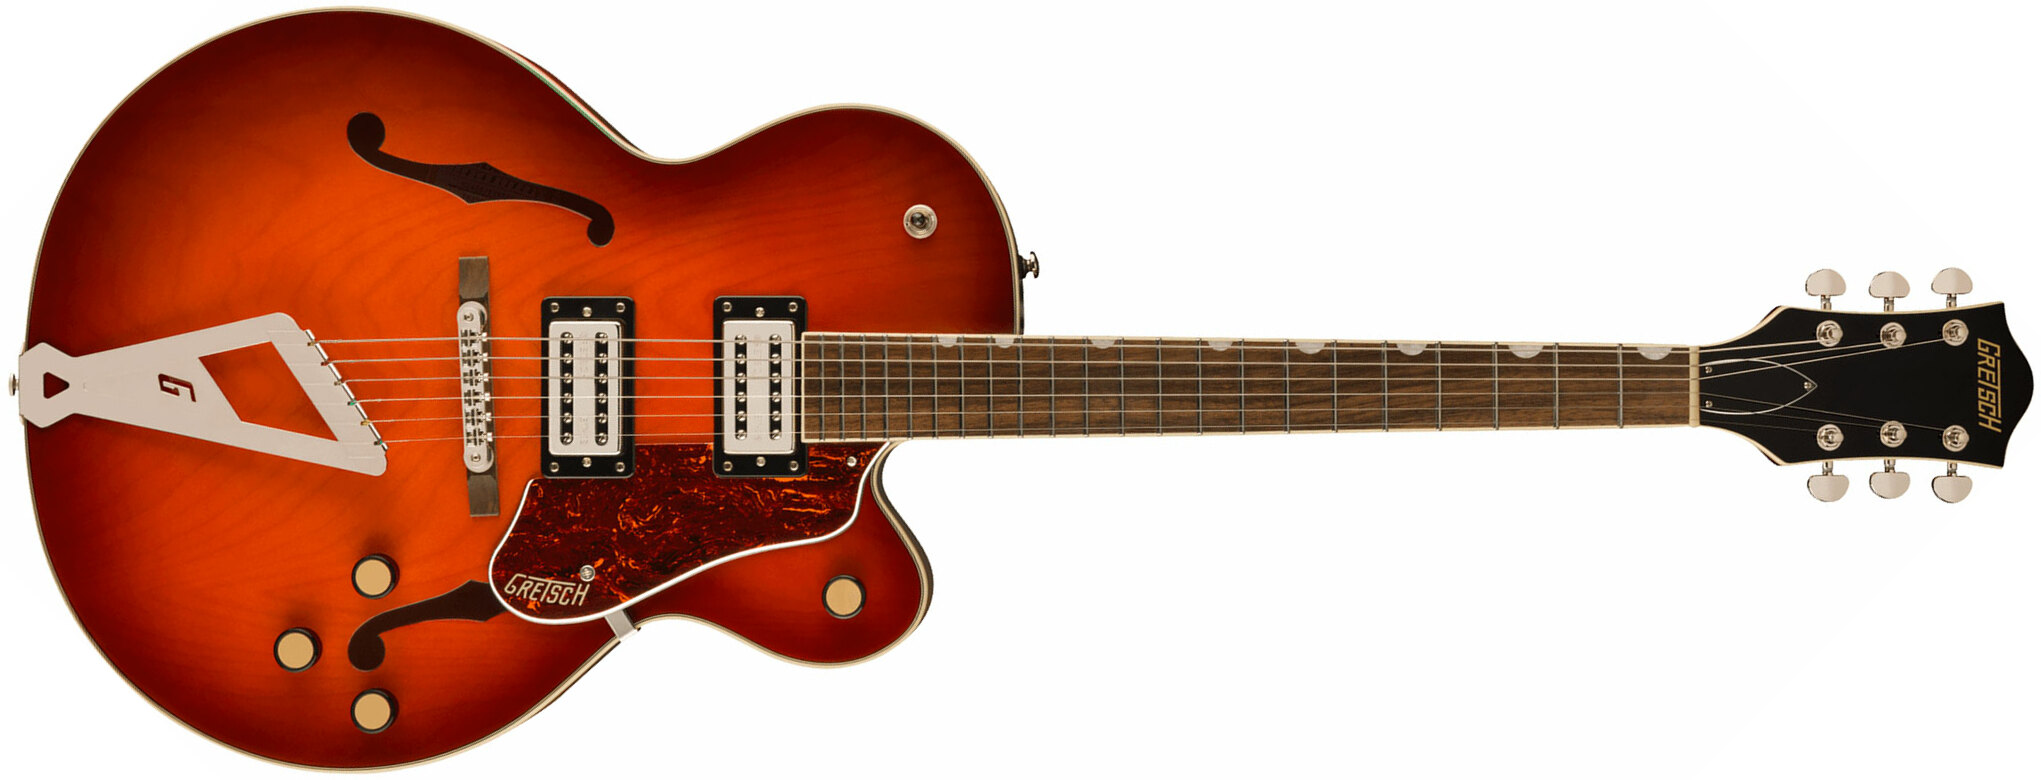 Gretsch G2420 Streamliner Hollow Body With Chromatic Ii 2h Ht Lau - Fireburst - Hollow-body electric guitar - Main picture